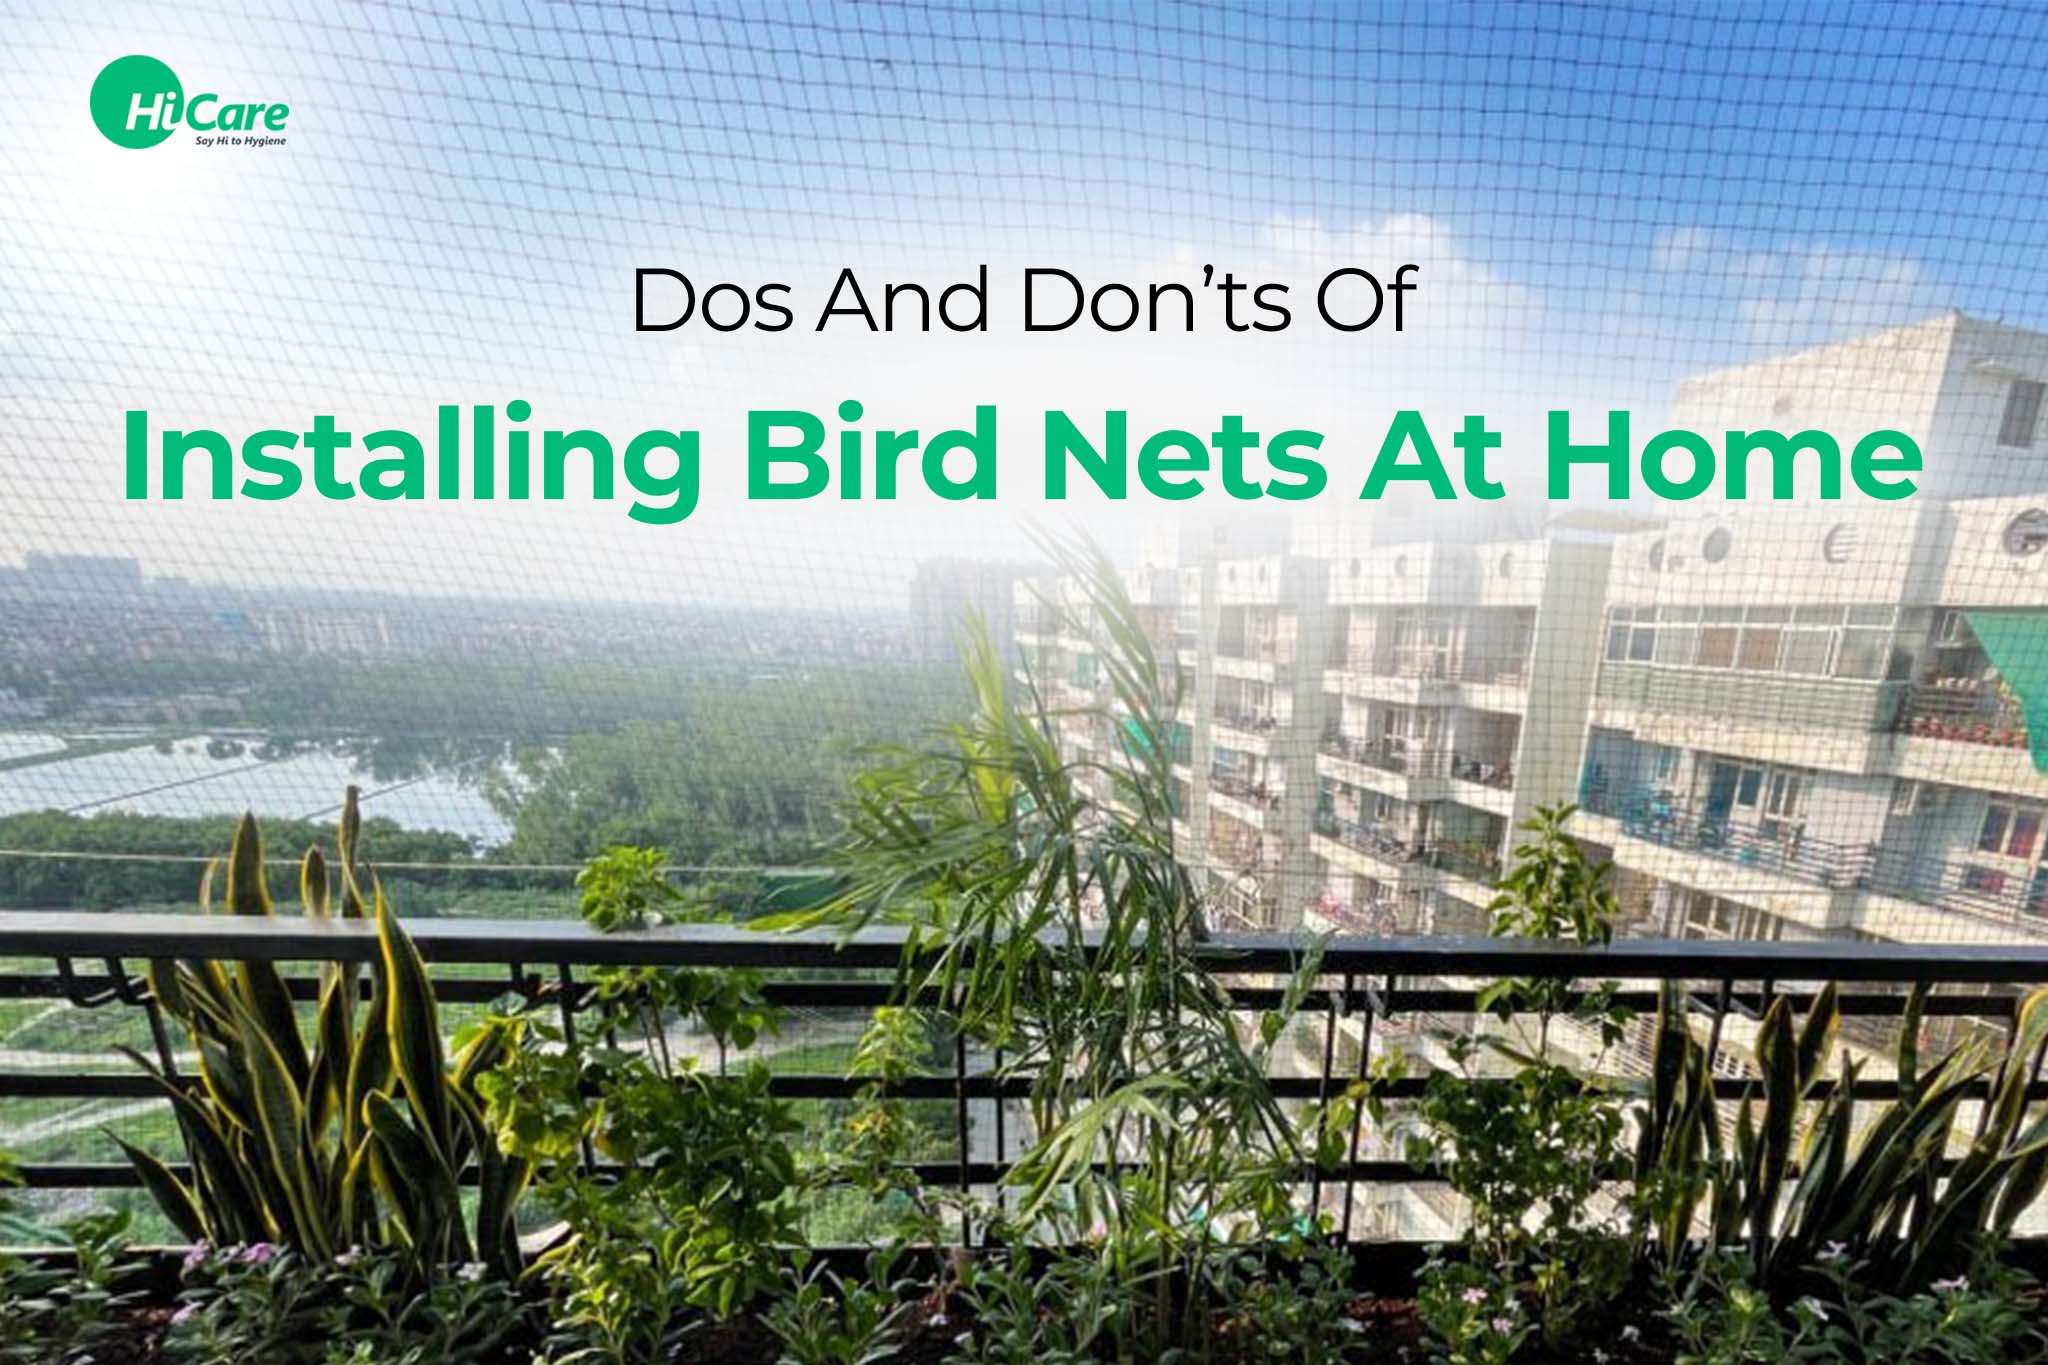 dos and don'ts of installing bird nets at home